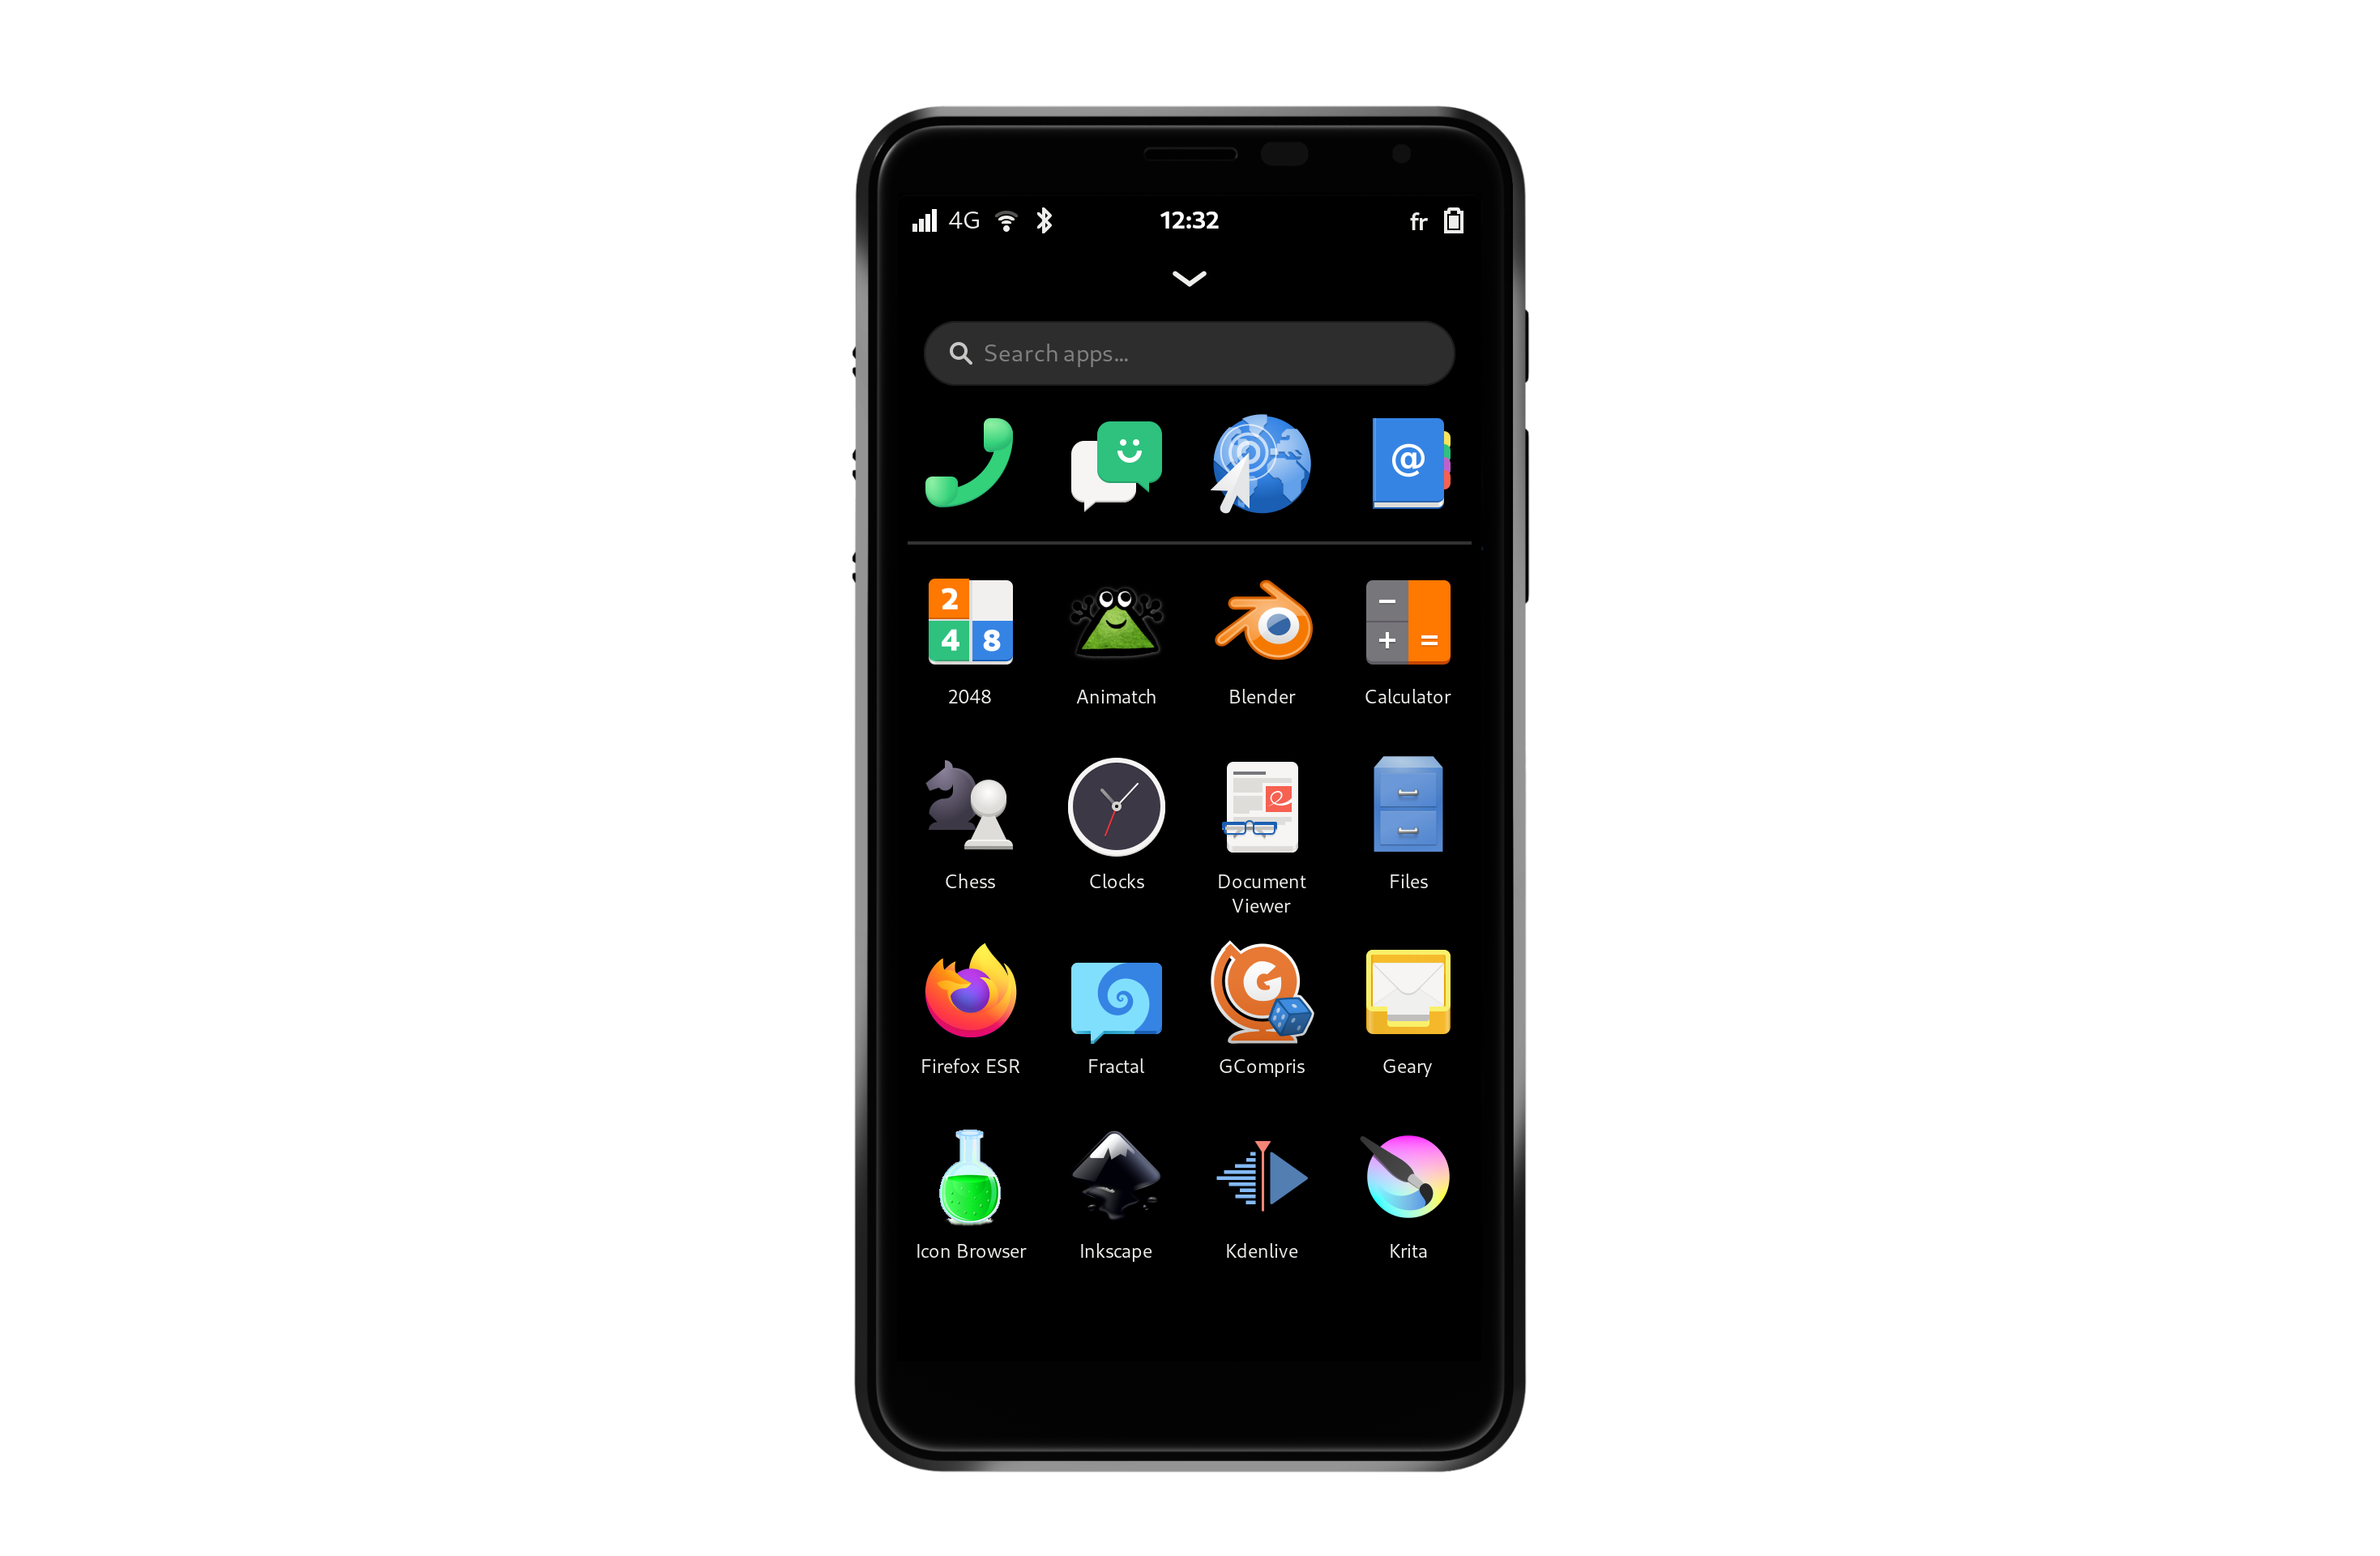 Librem 5, the most secure phone available today